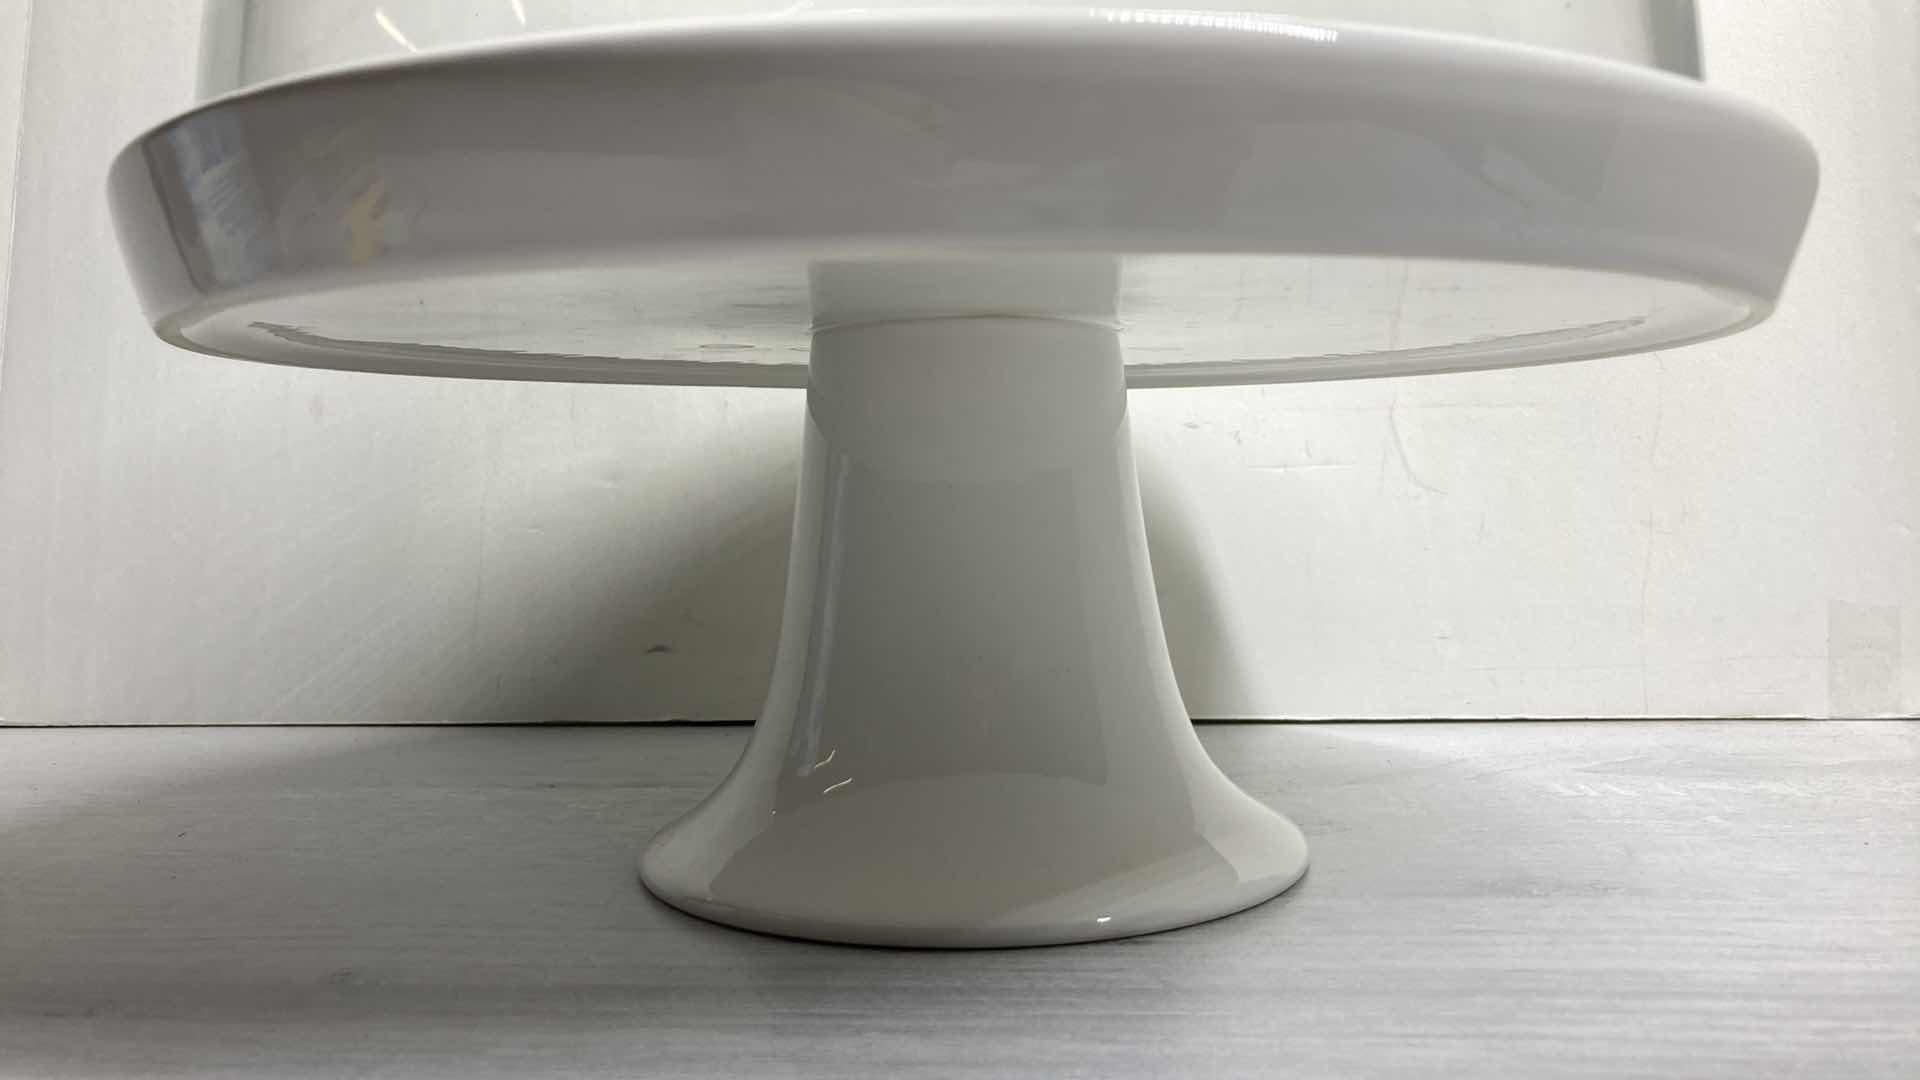 Photo 4 of P HOME FAPOR 11.75” PORCELAIN CAKE STAND W CLEAR GLASS LID MADE IN PORTUGAL